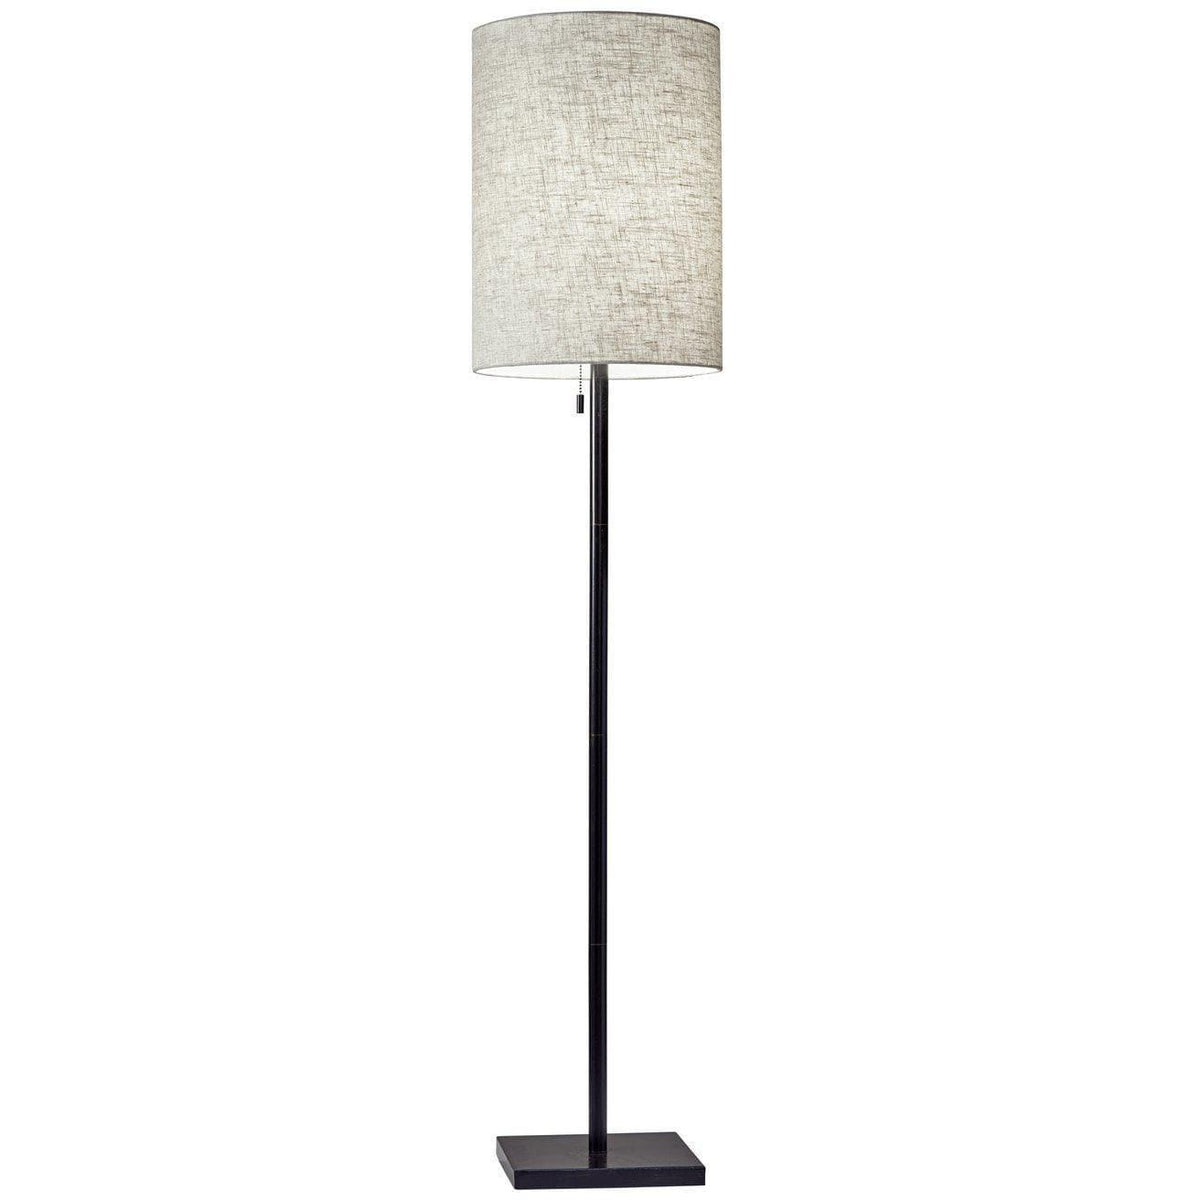 HARMONY Table Lamp in Satin Brass with Vintage White Fabric Shade